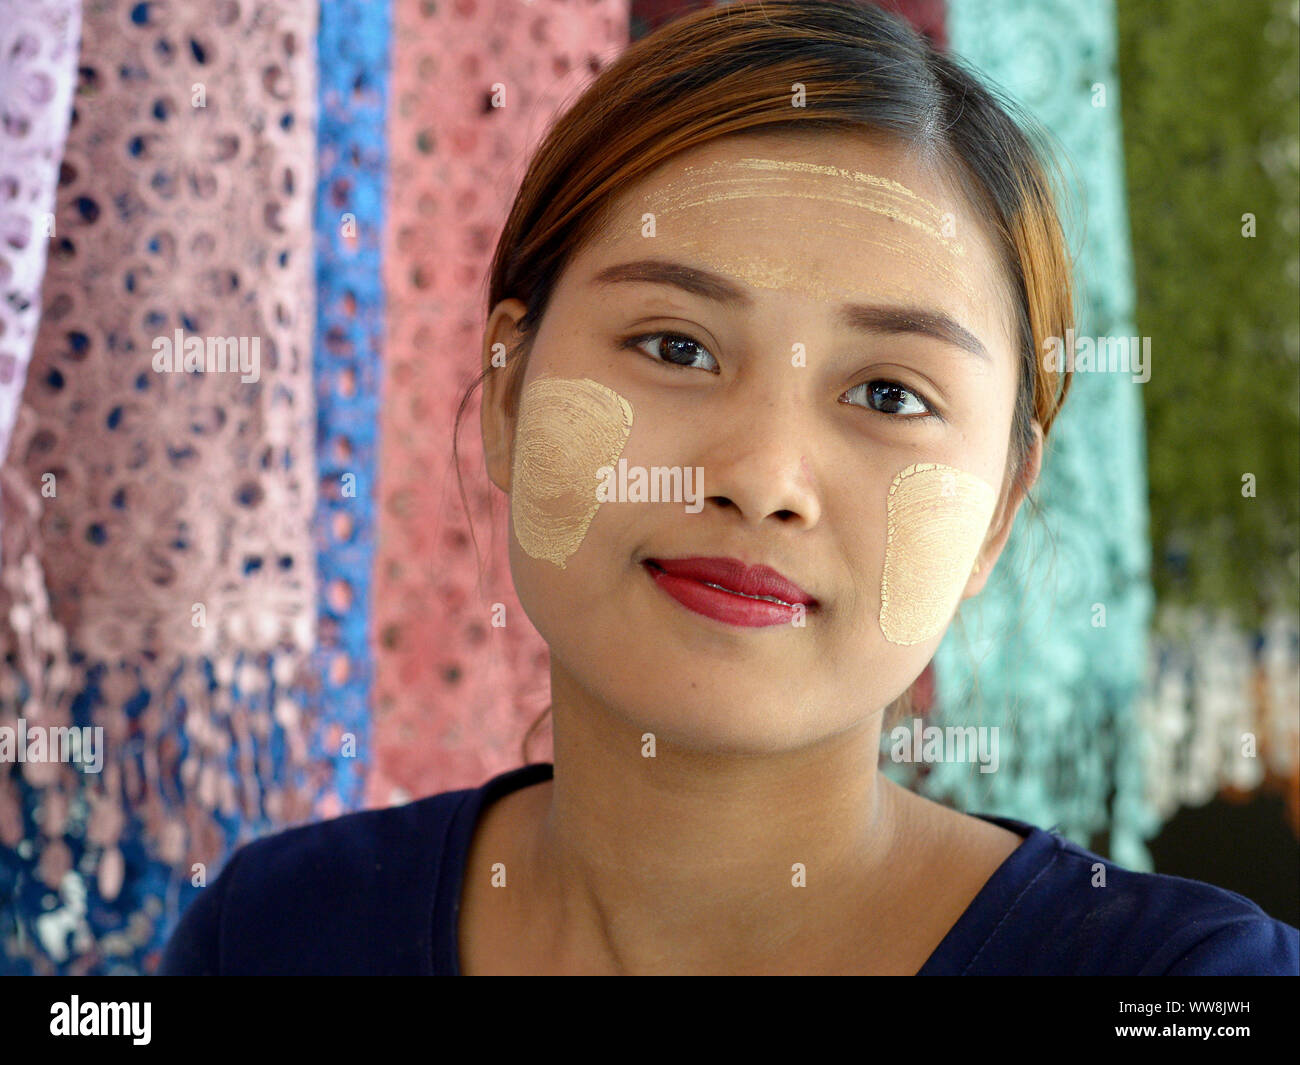 Young Burmese woman with patches of yellowish-white traditional thanaka face cosmetic on forehead and cheeks poses for the camera. Stock Photo